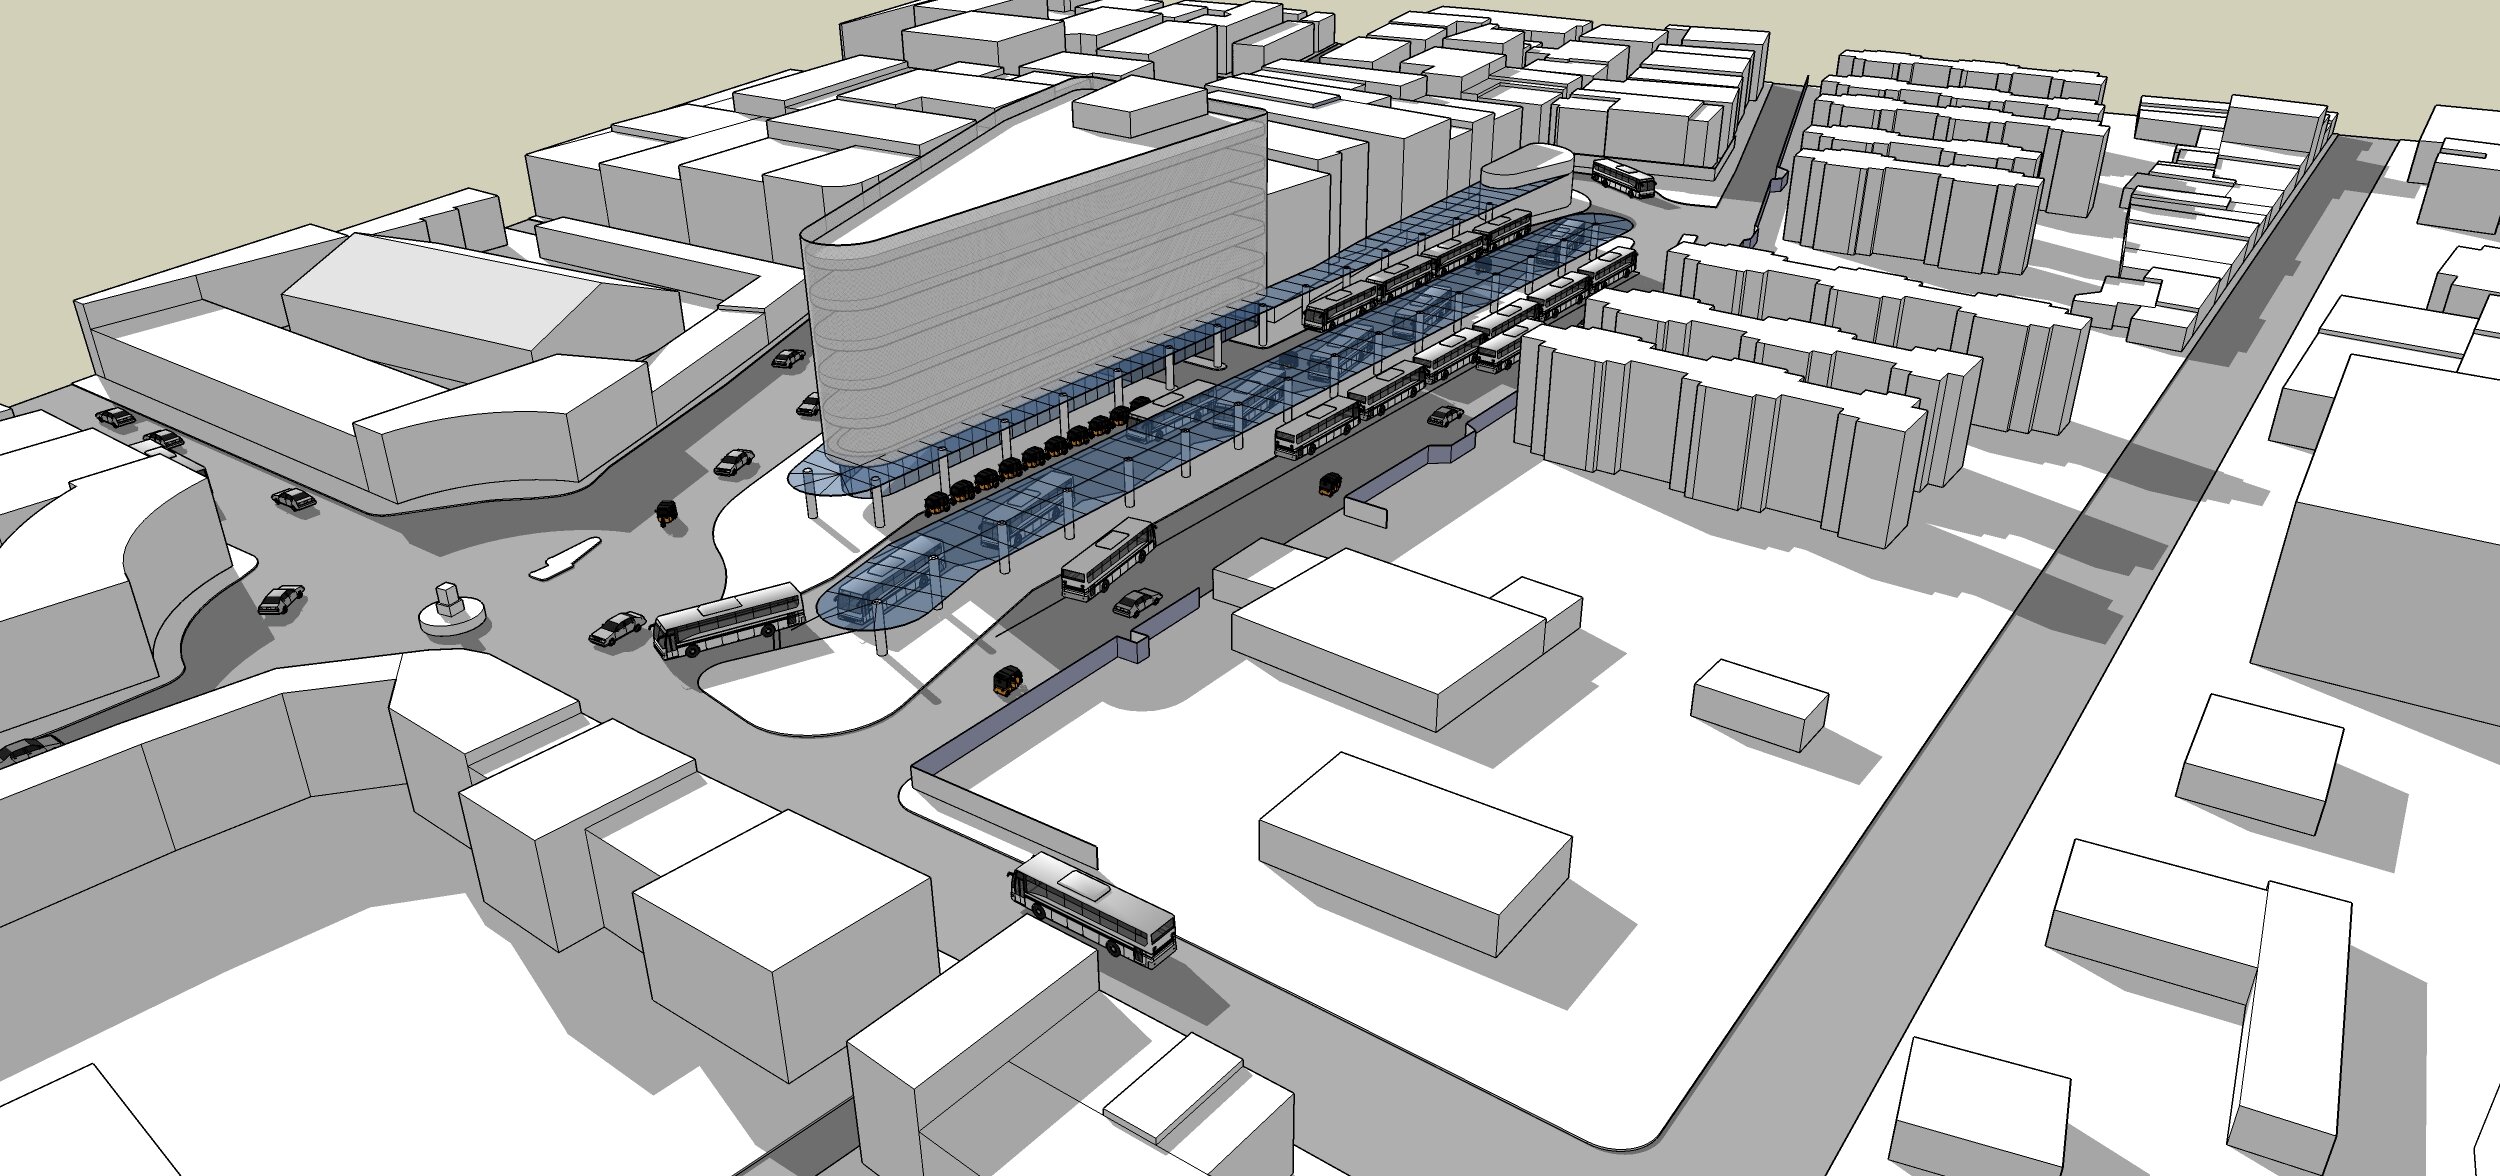 Aerial view of the 3D model of one of the Bus Terminals